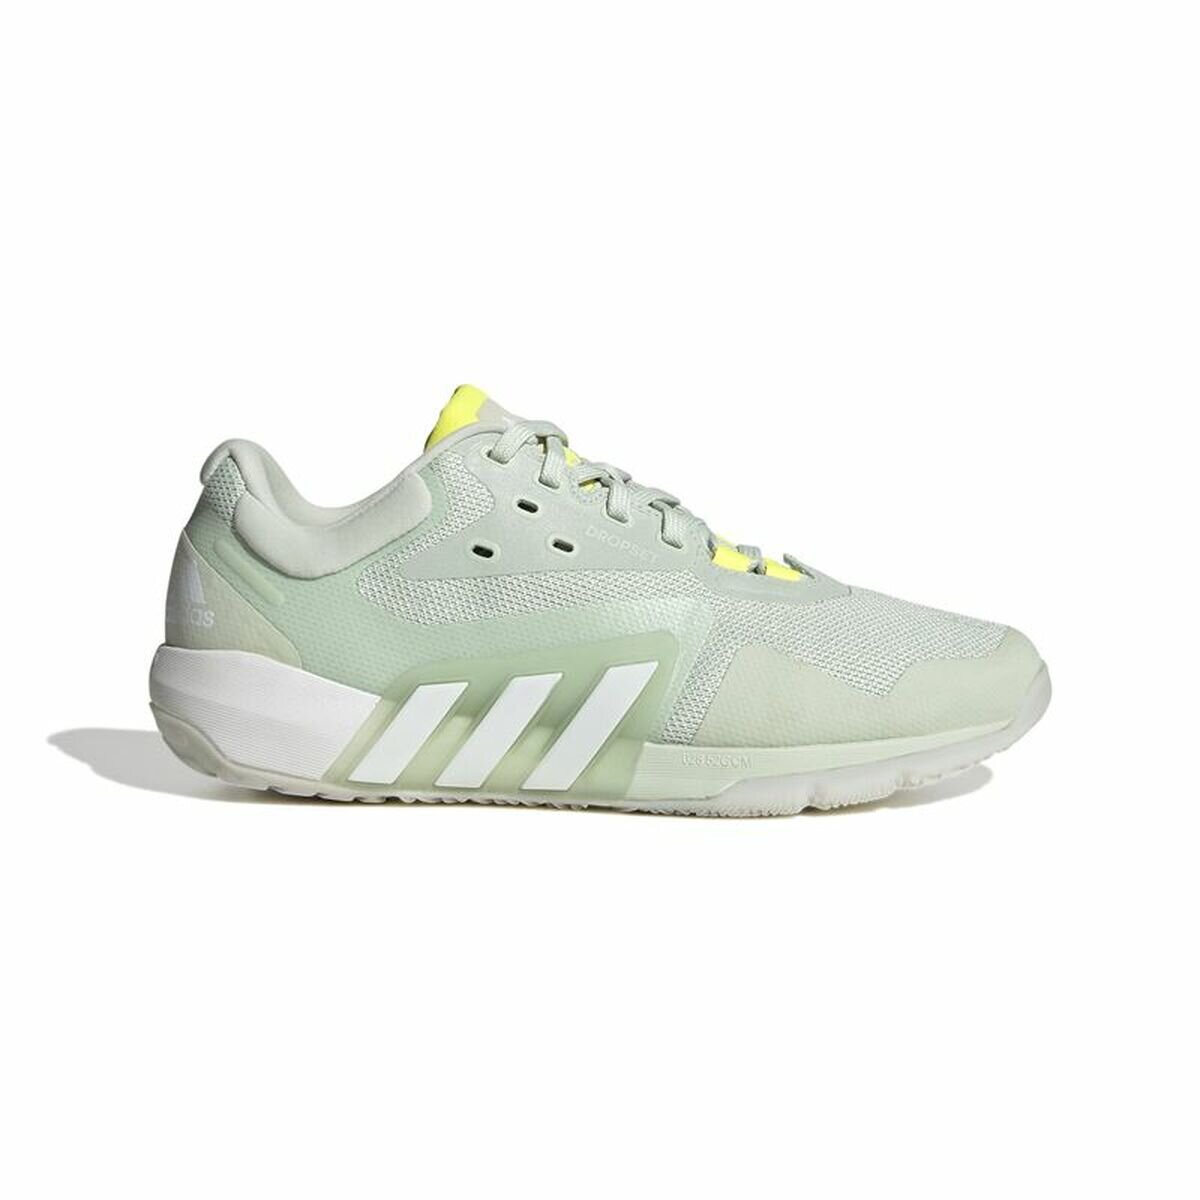 Adidas Dropset Trainer fitness shoes